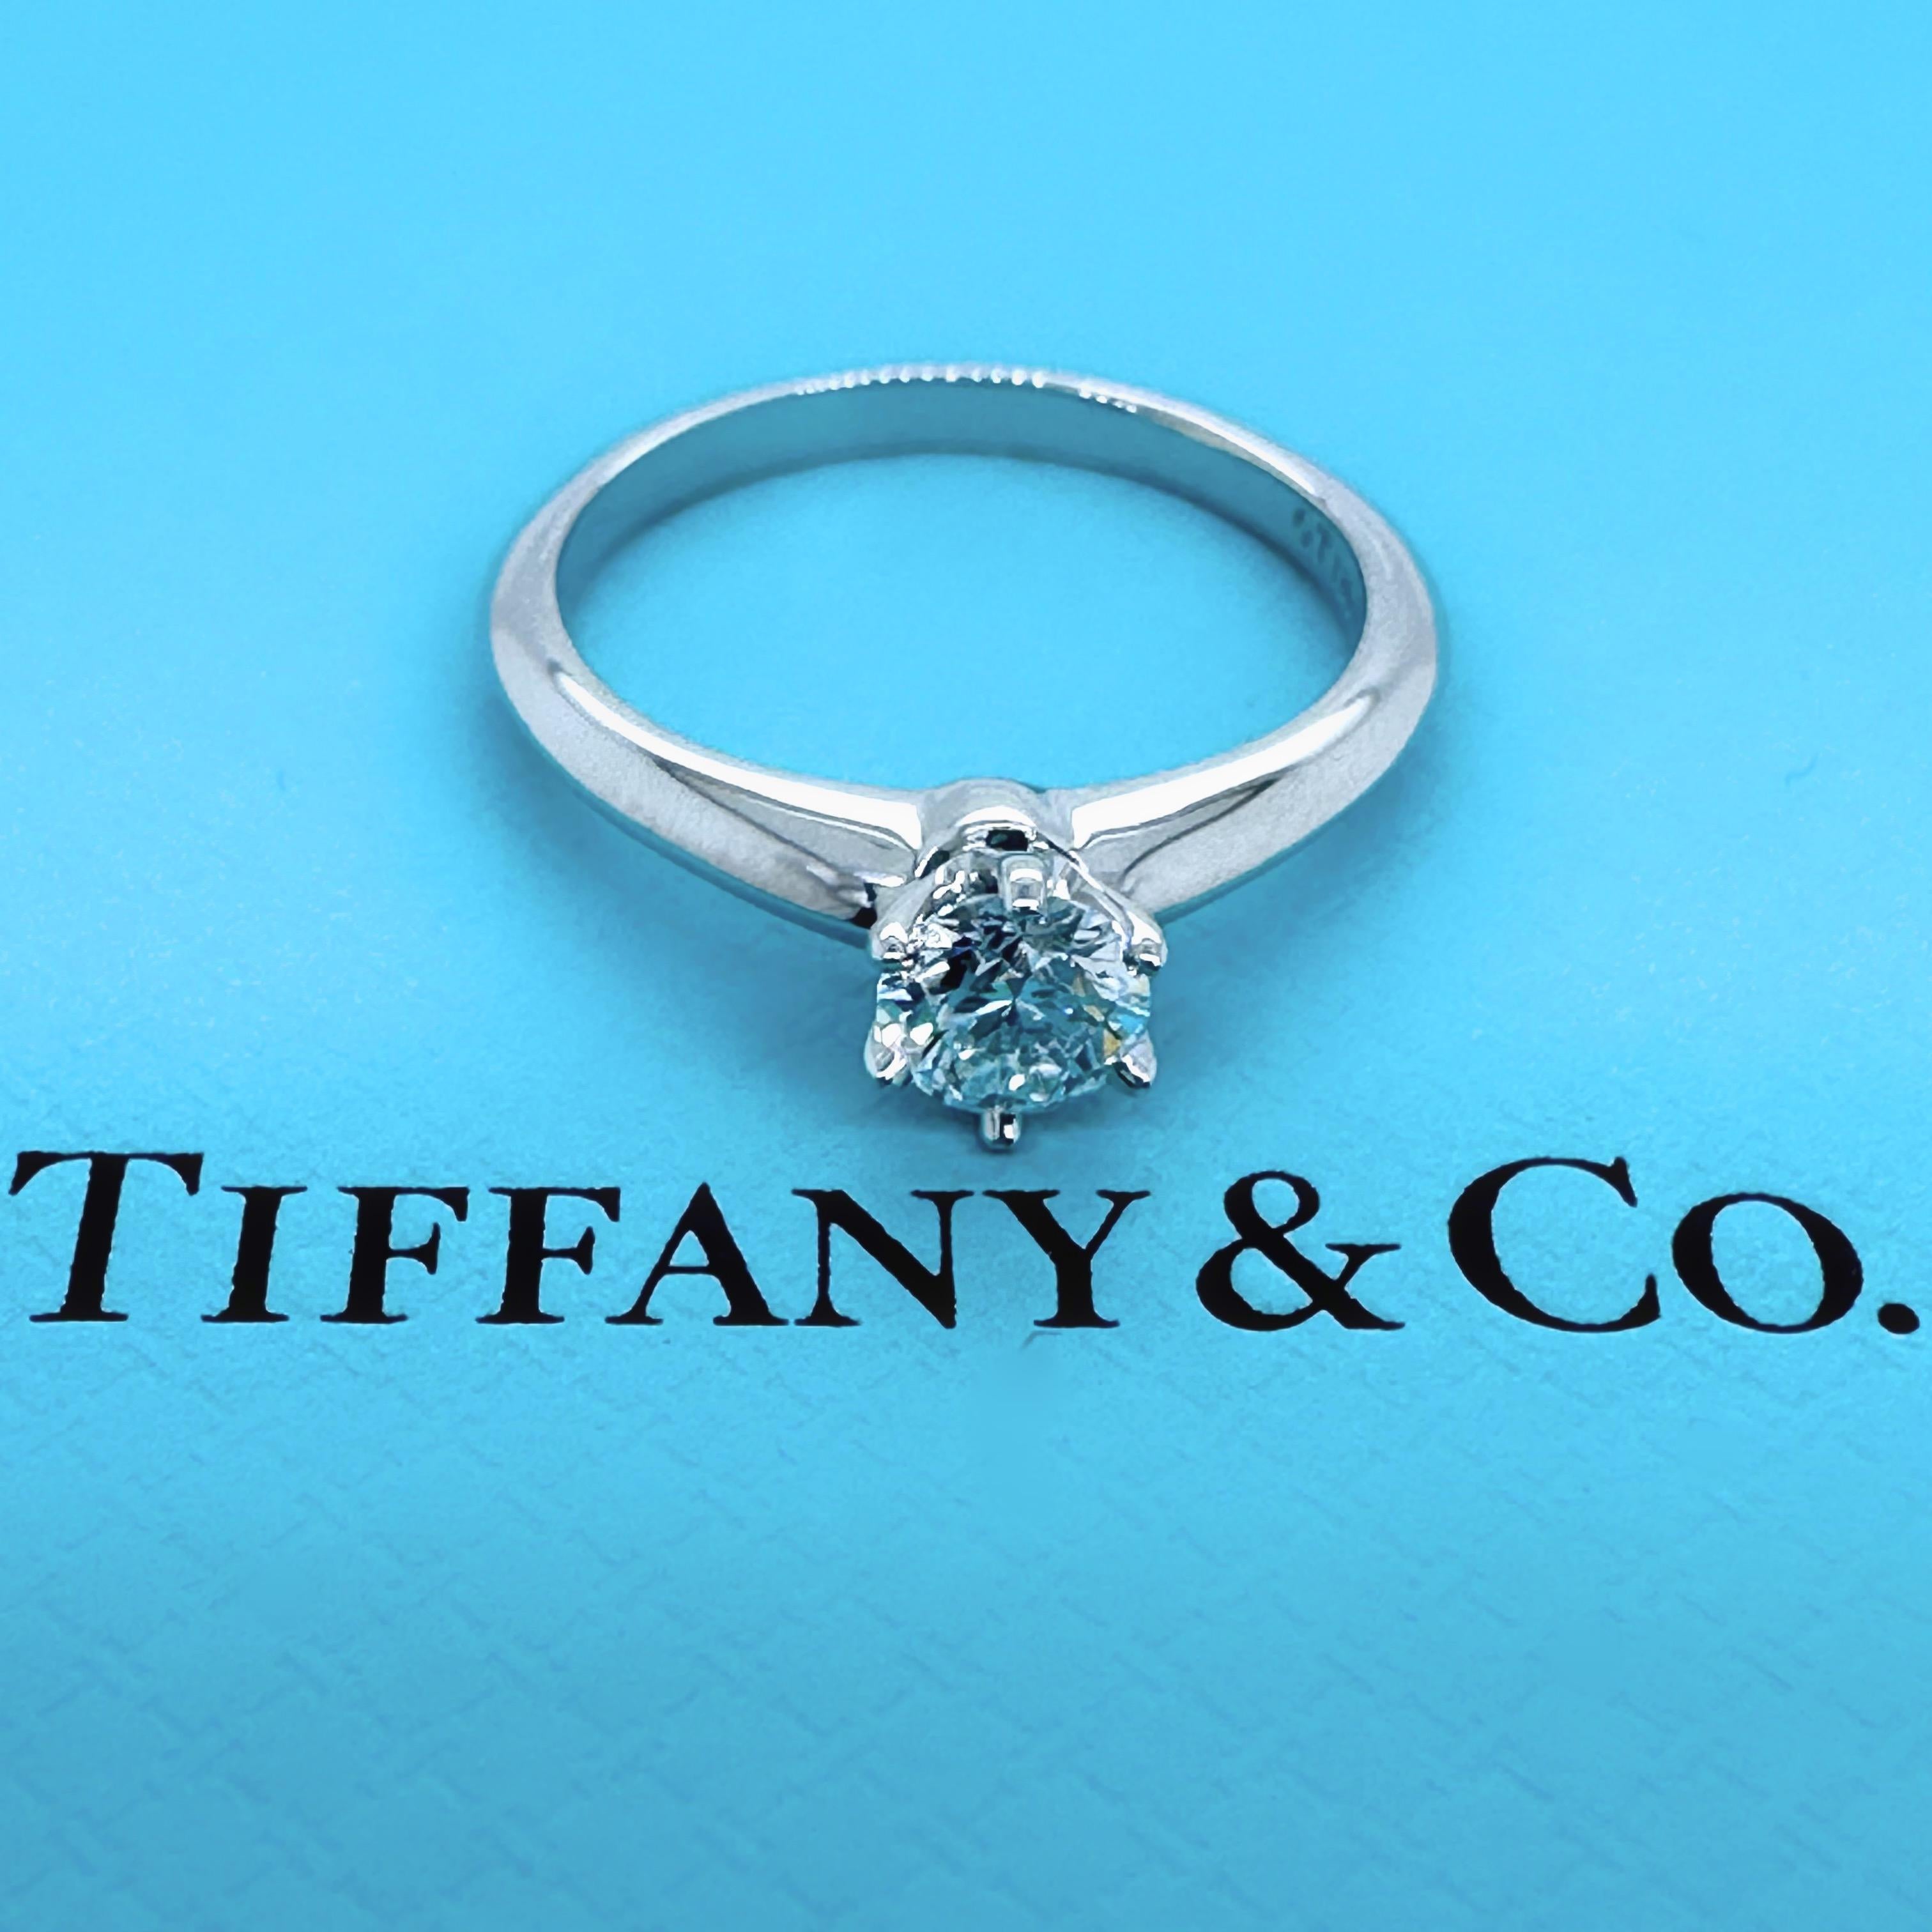 Tiffany & Co. Round Diamond 0.37 Cts F VVS1 Solitaire Engagement Ring Platinum For Sale 4